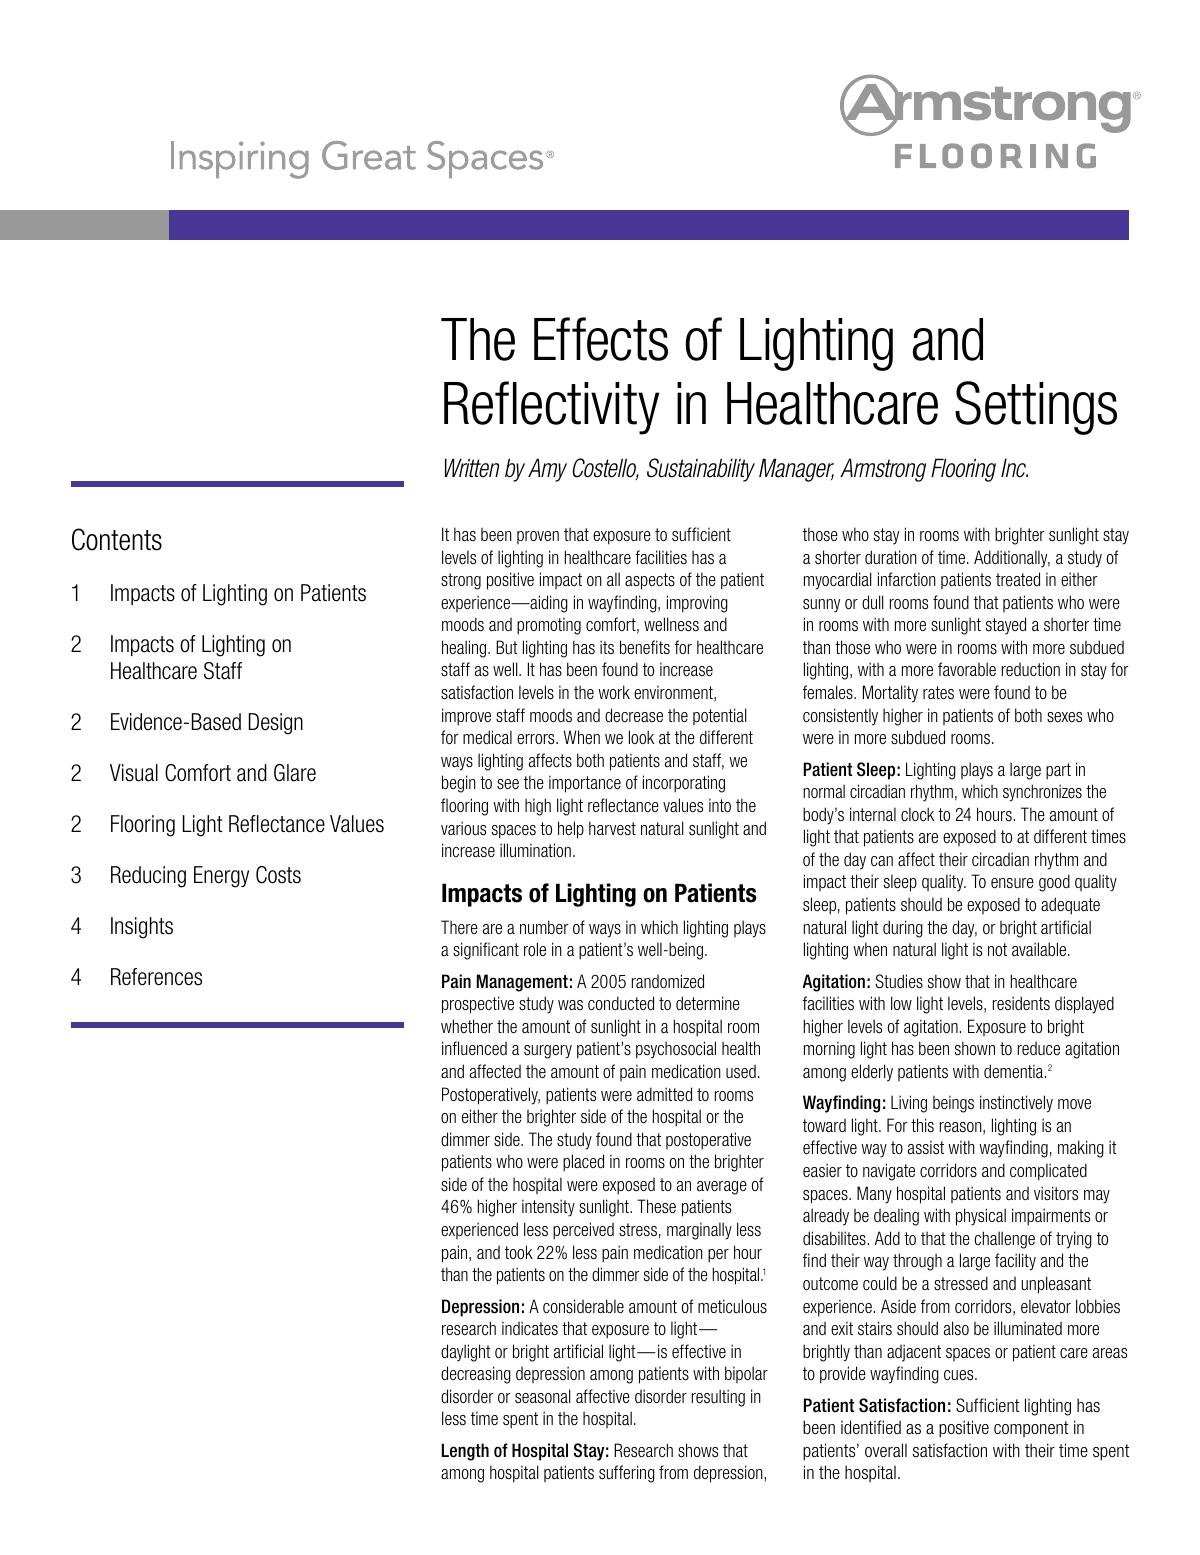 The Effects of Lighting and Reflectivity in Healthcare Settings